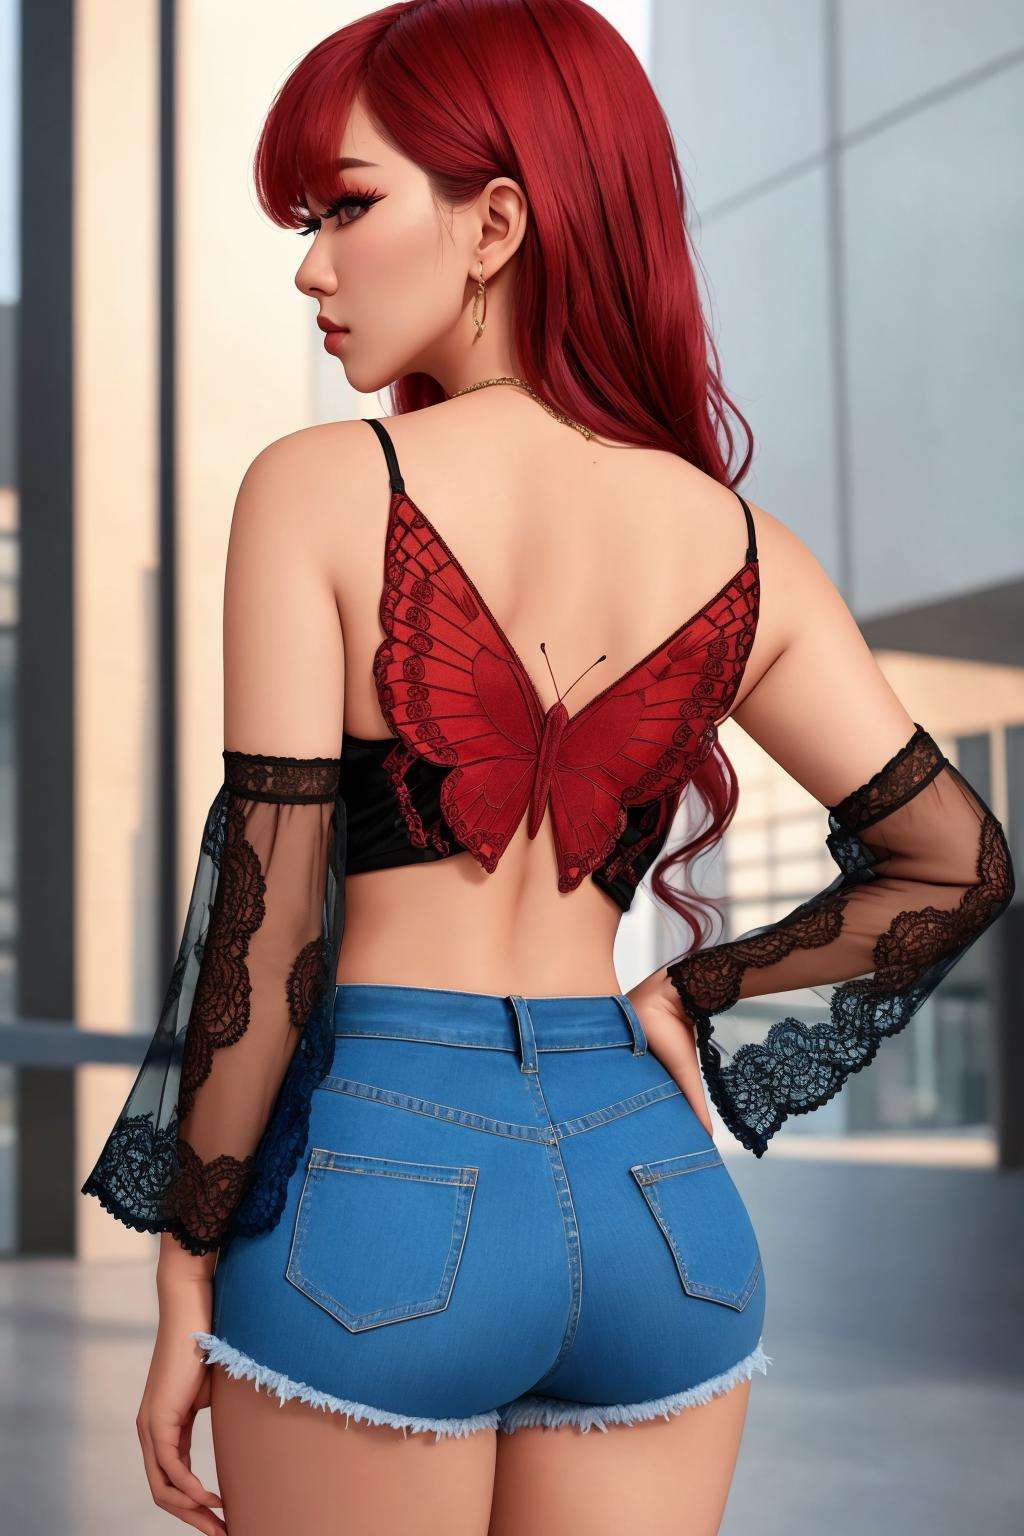 4K, Masterpiece, highres, absurdres, Urban_Gal,butterfly_top, a woman standing for a picture , asian woman wearing Urban_Gal, butterfly design embroidery <lora:UrbanButterfly:0.75>